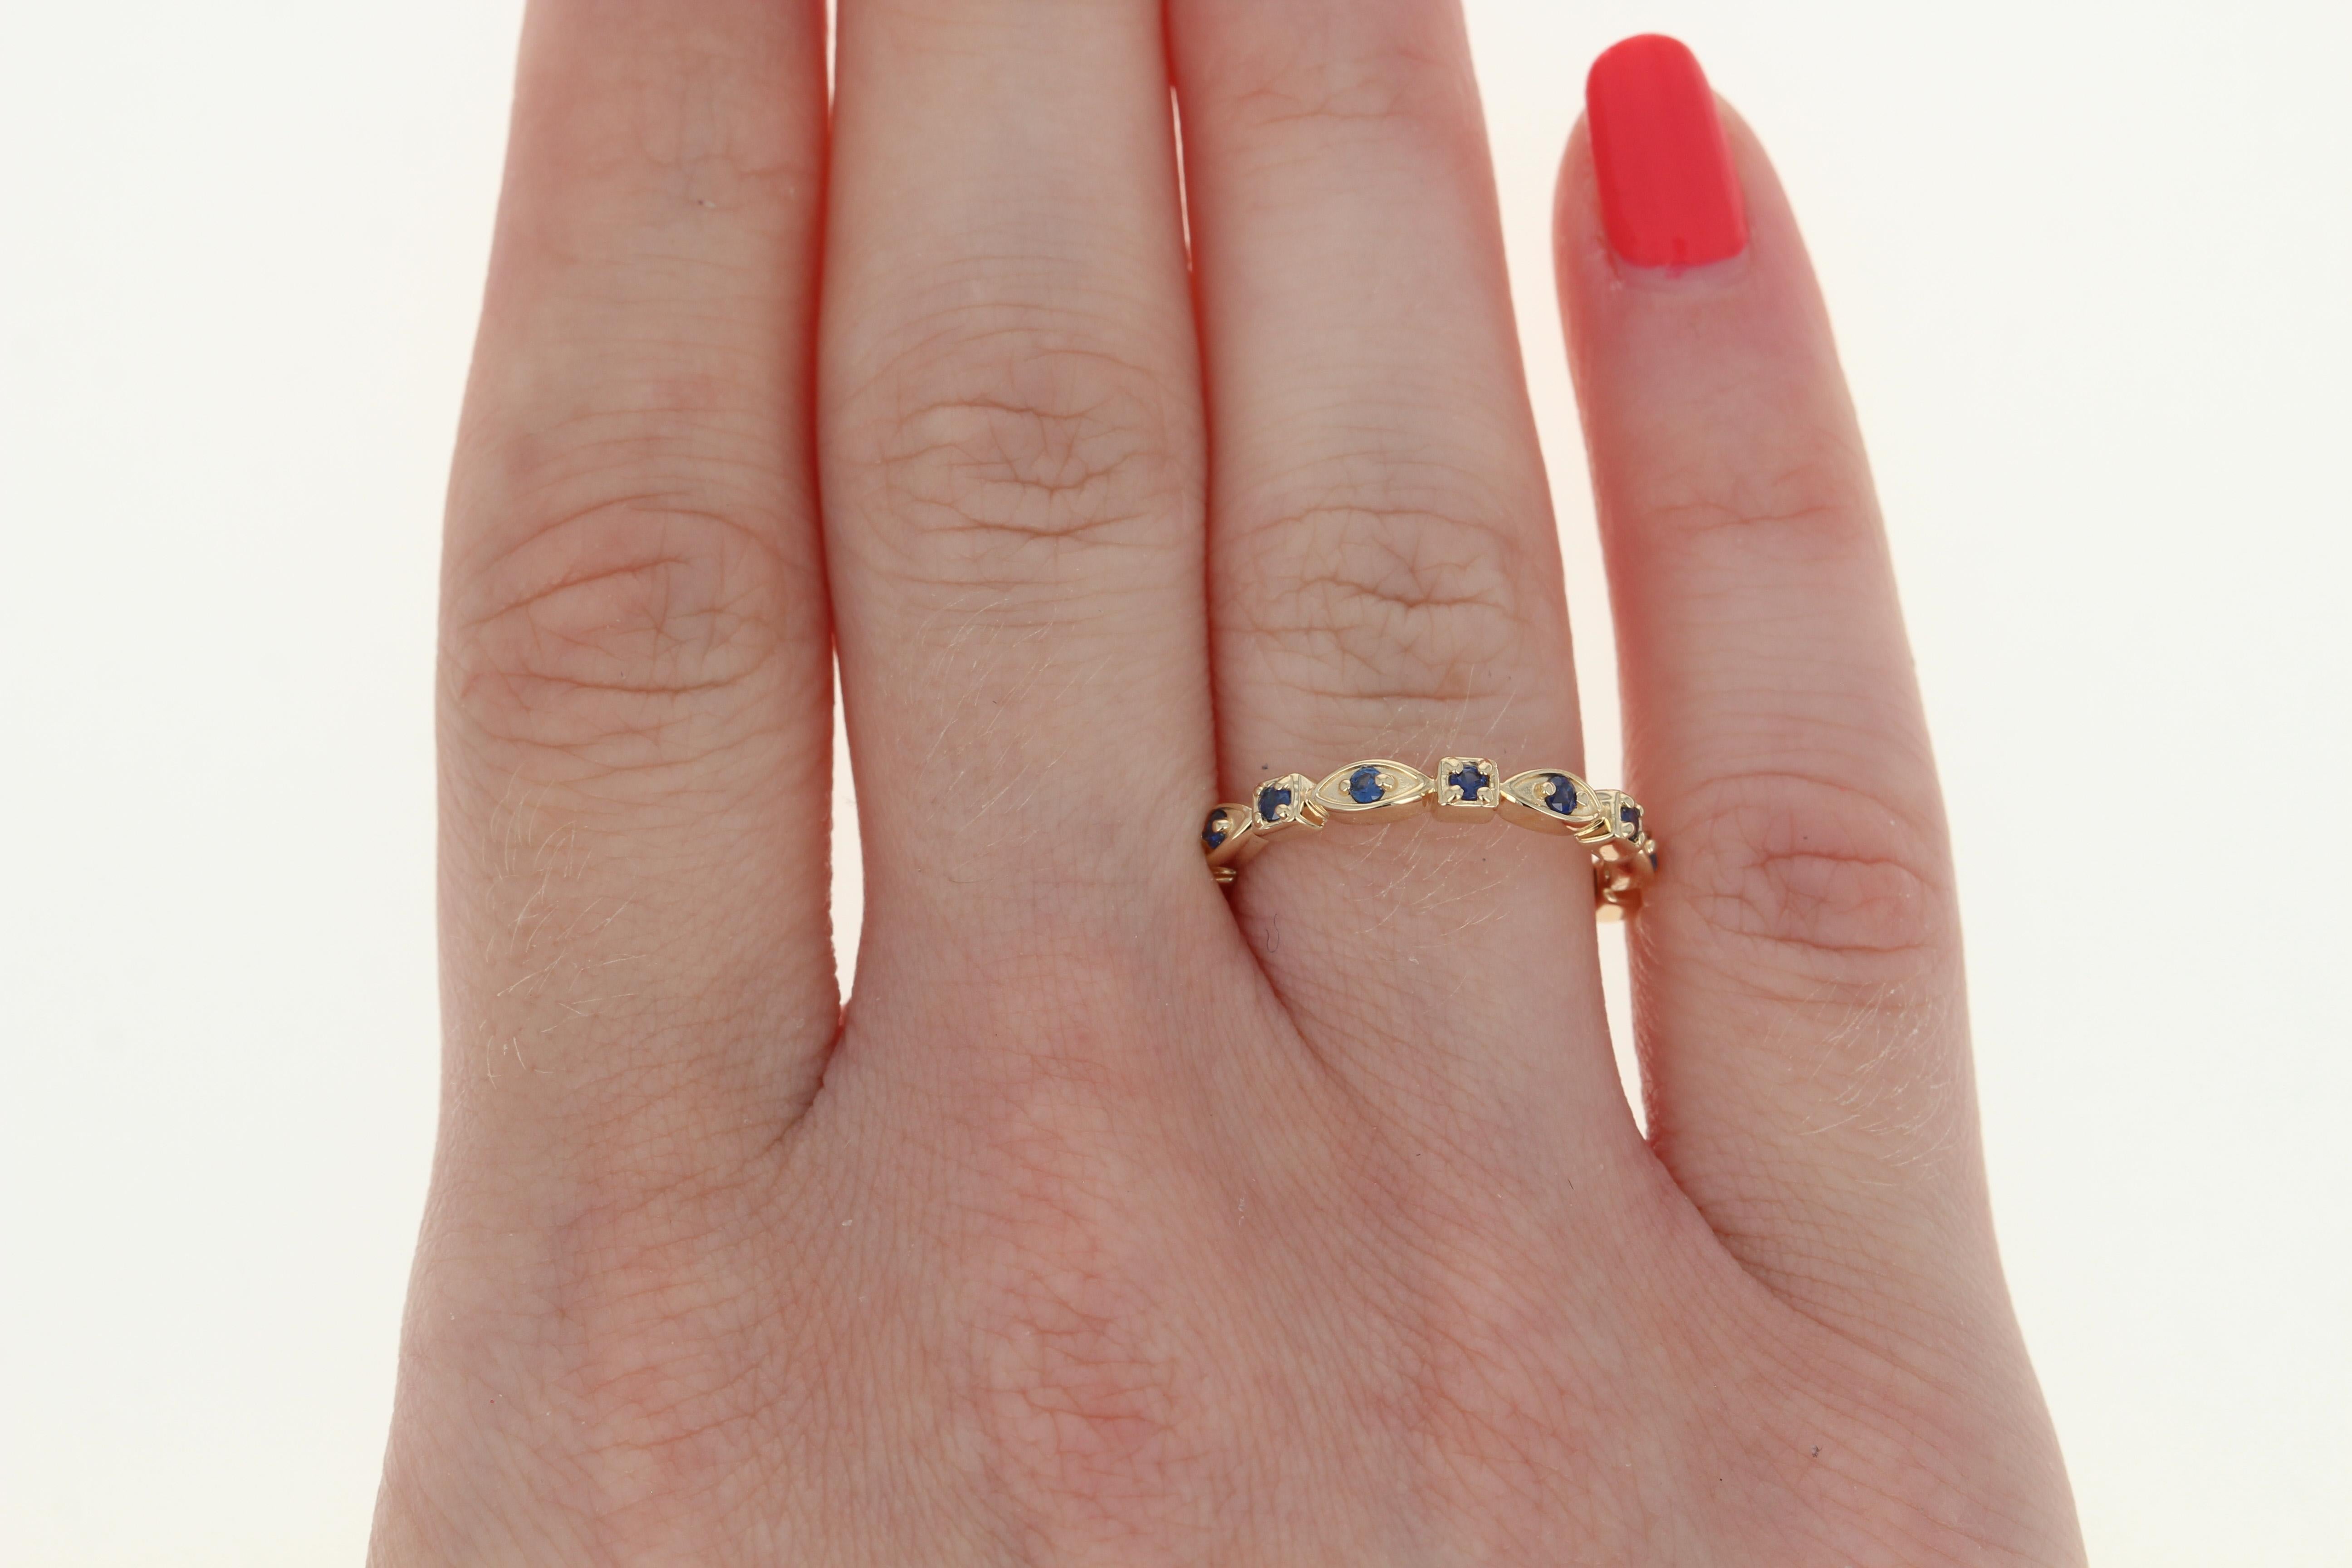 Add a sweet splash of vivacious color to your wardrobe with this gorgeous NEW ring! Crafted in glowing 14k yellow gold, this band is fashioned in a romantic eternity style design adorned with shimmering blue sapphires. 

This ring is a size 7.